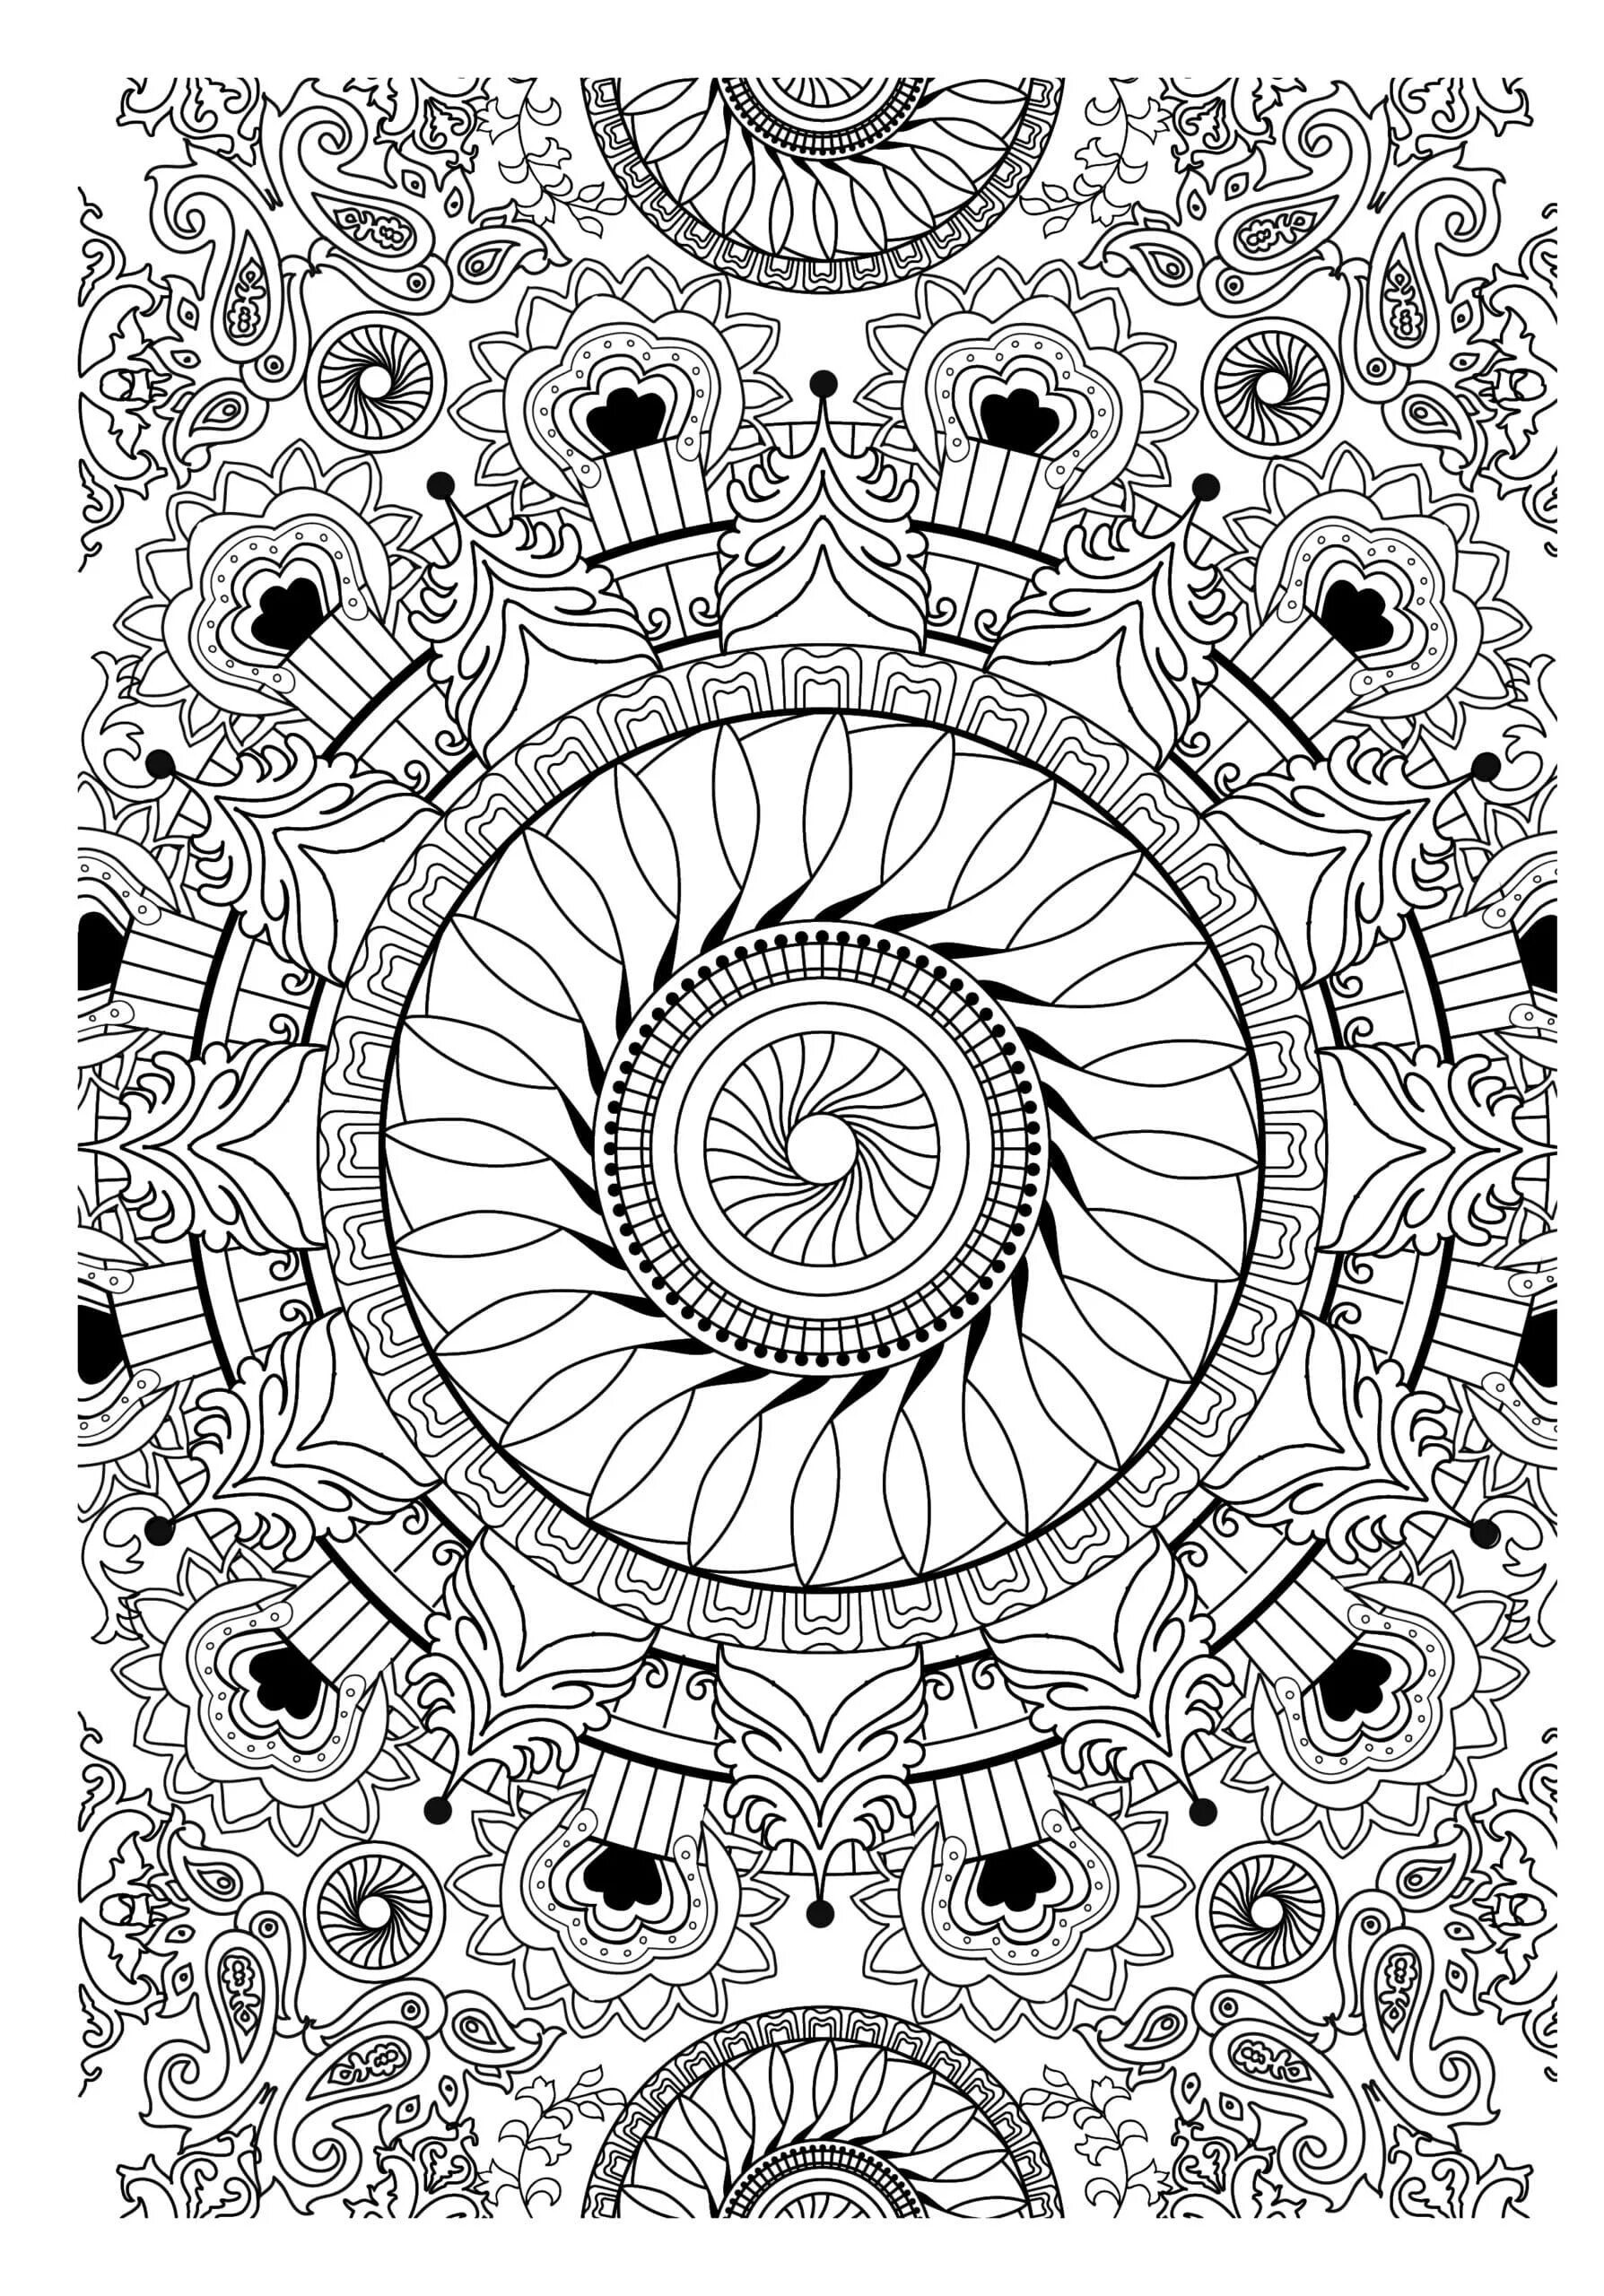 Great meditative coloring book for adults